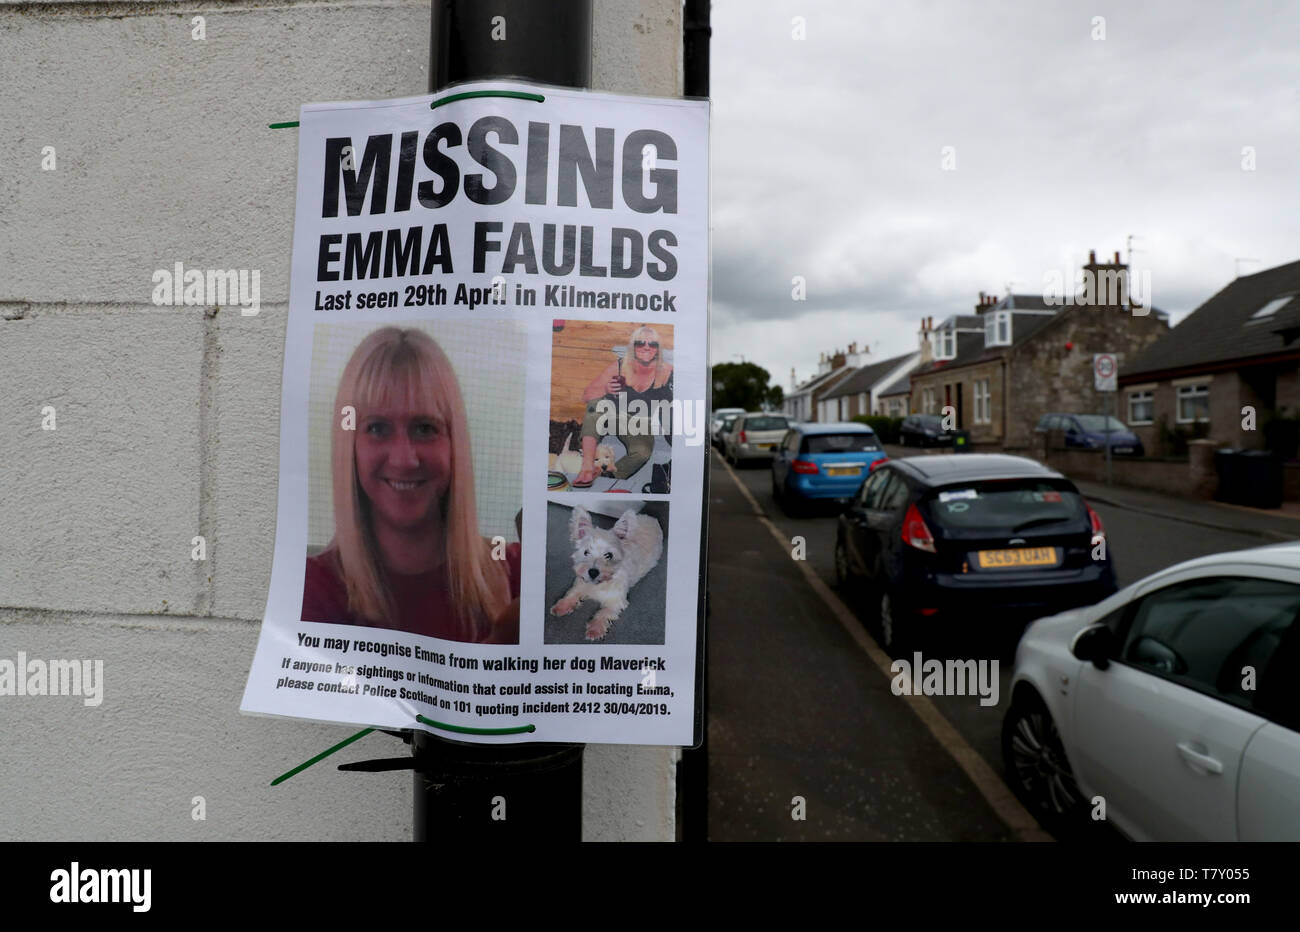 Missing person poster in Monkton, Ayrshire, where 39 year-old Emma Faulds from Kilmarnock was last seen after she was reported missing. A 39-year-old man has been arrested in connection with her disappearance. Stock Photo